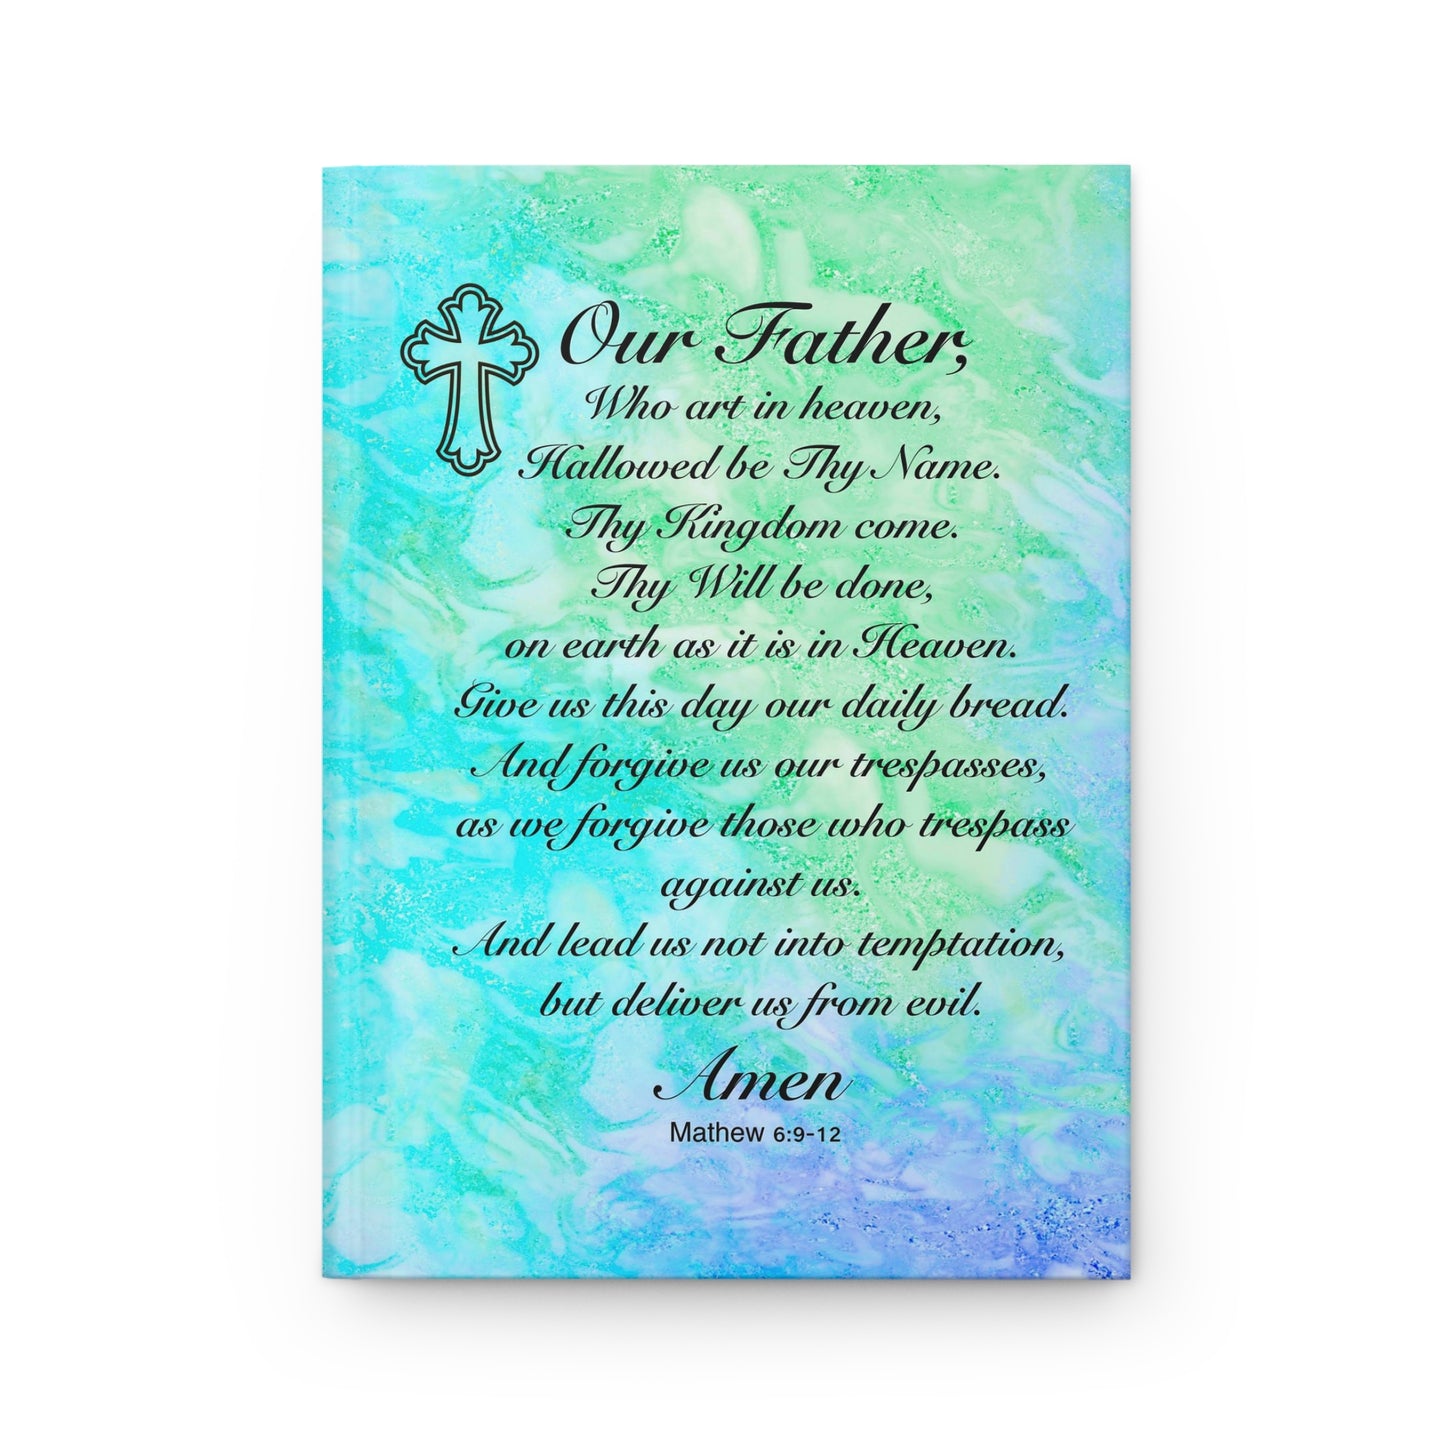 The Lords Prayer Marble Teal Hardcover Journal